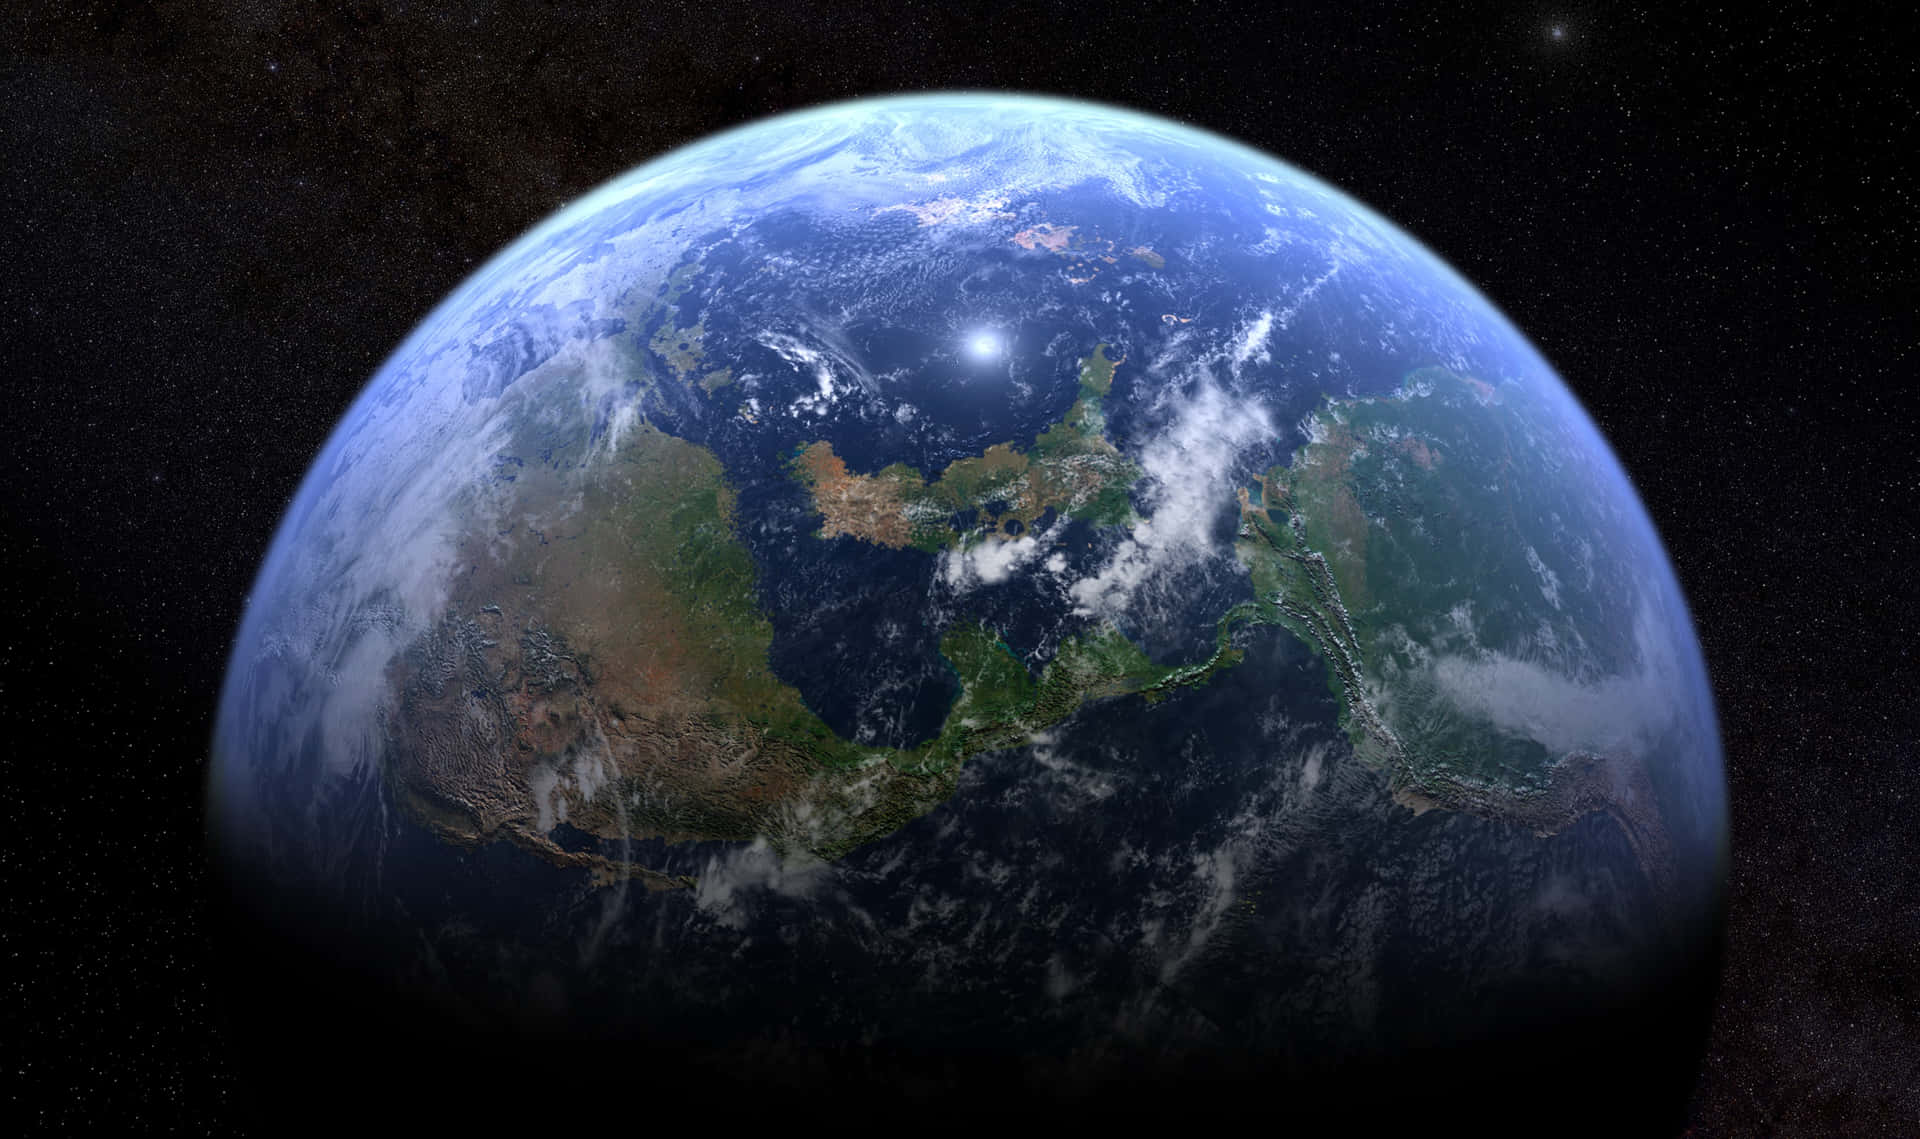 "A View of Earth From Outer Space" Wallpaper